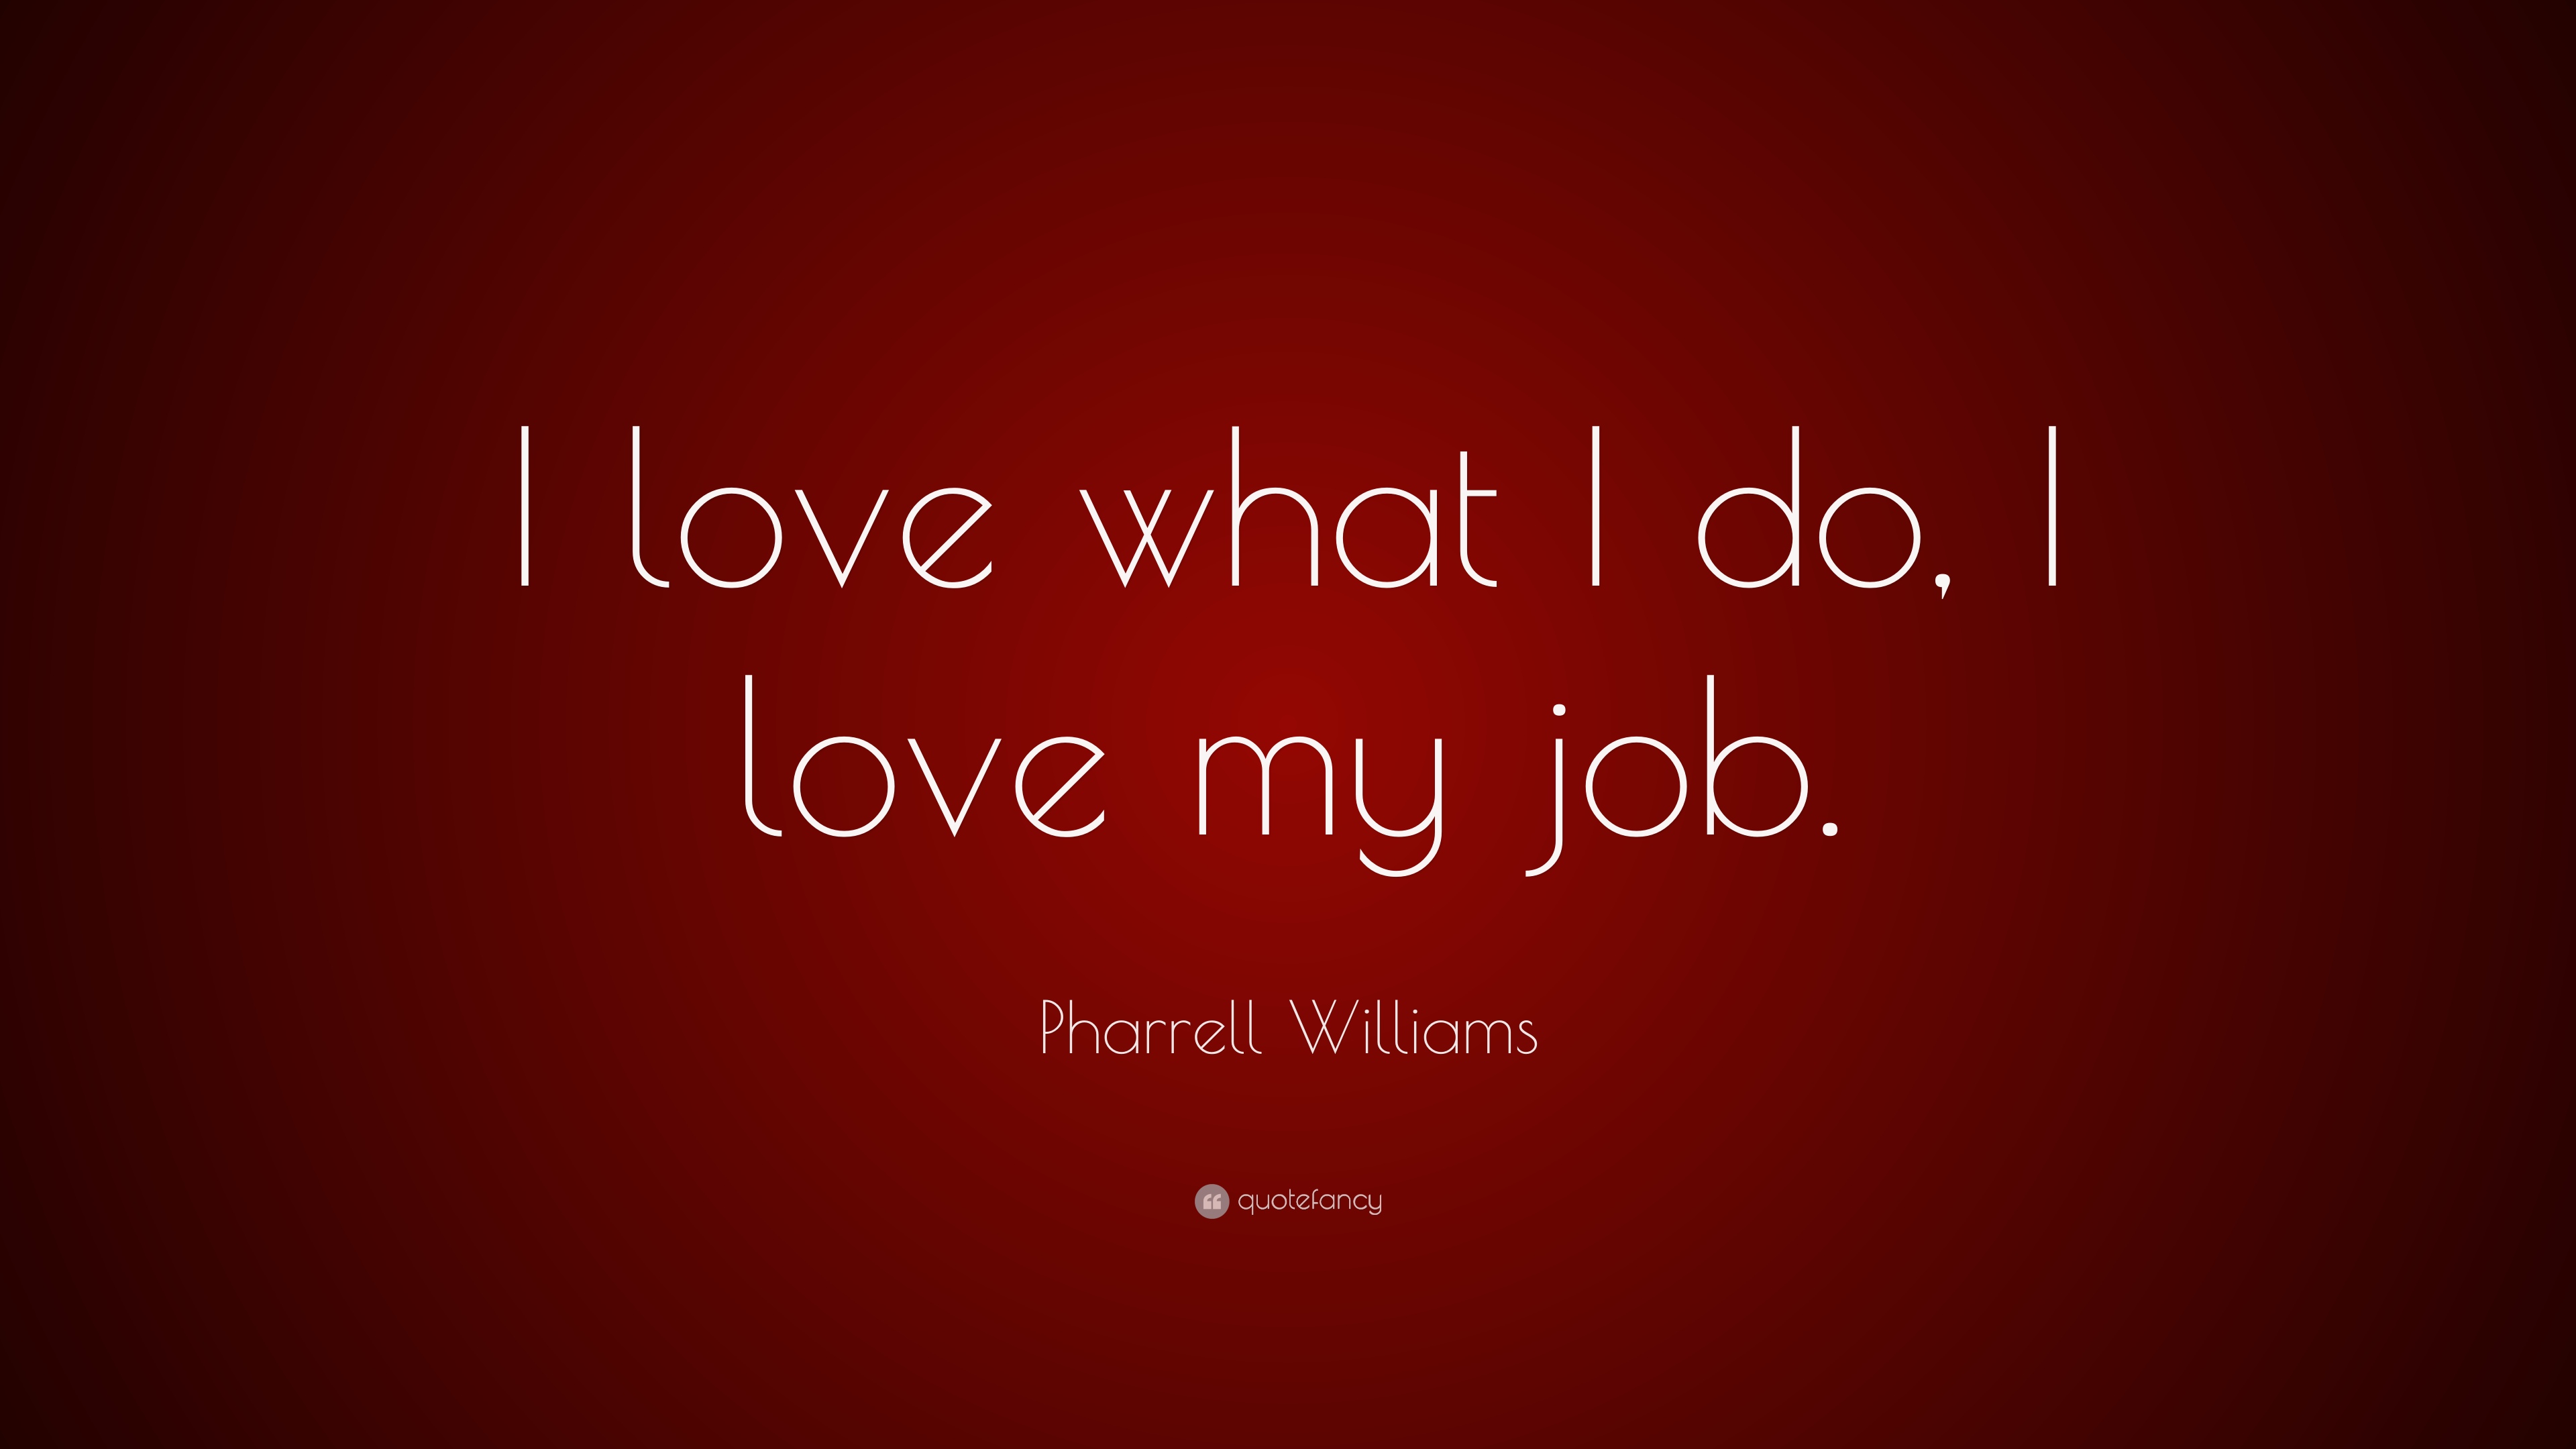 8 Pharrell Williams Quotes About Love